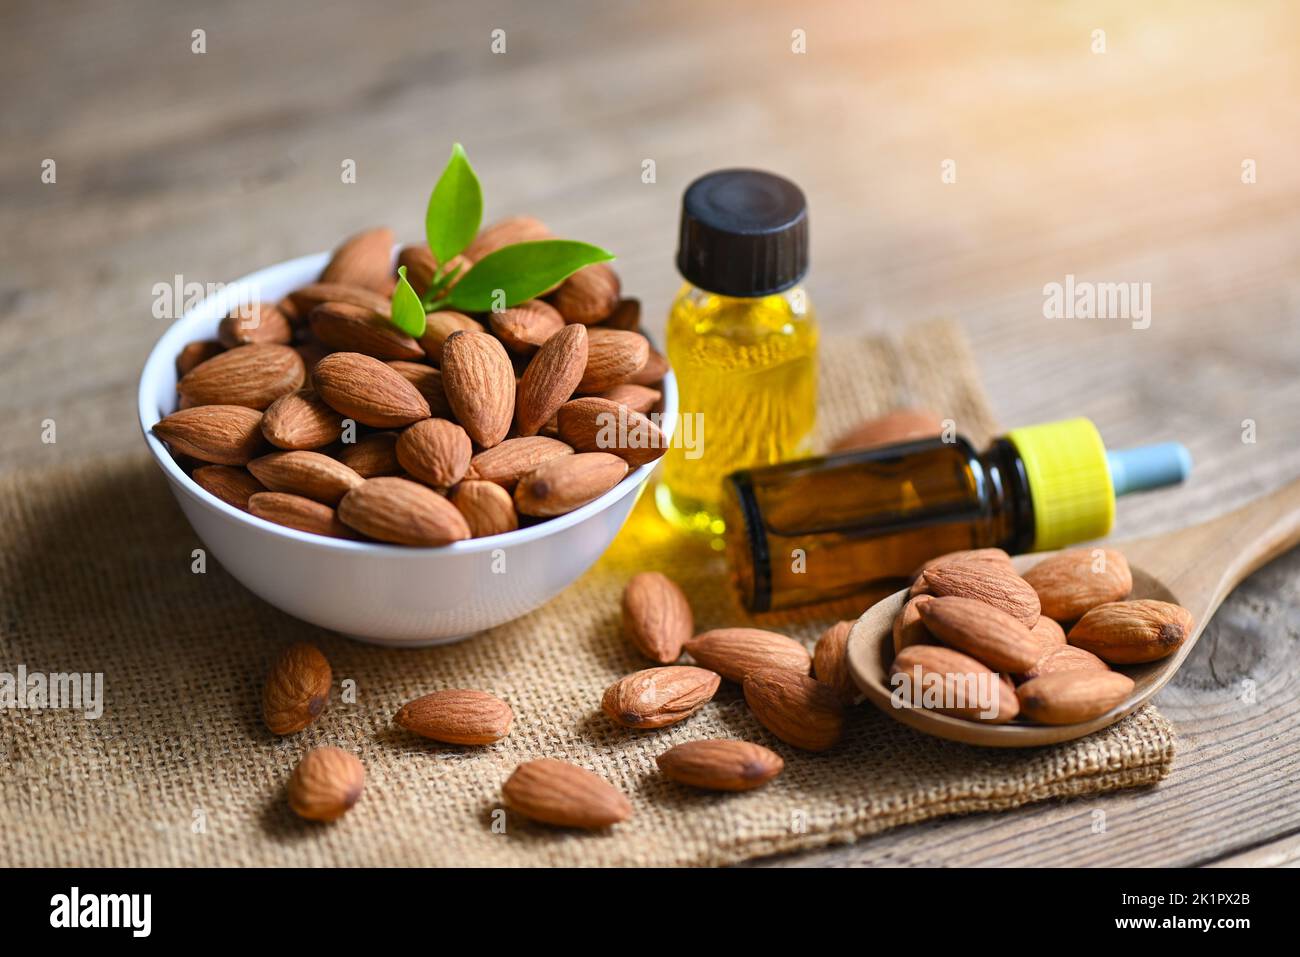 Almond oil and Almonds nuts on bowl, Delicious sweet almonds oil in glass bottle, roasted almond nut for healthy food and snack organic vegetable oils Stock Photo